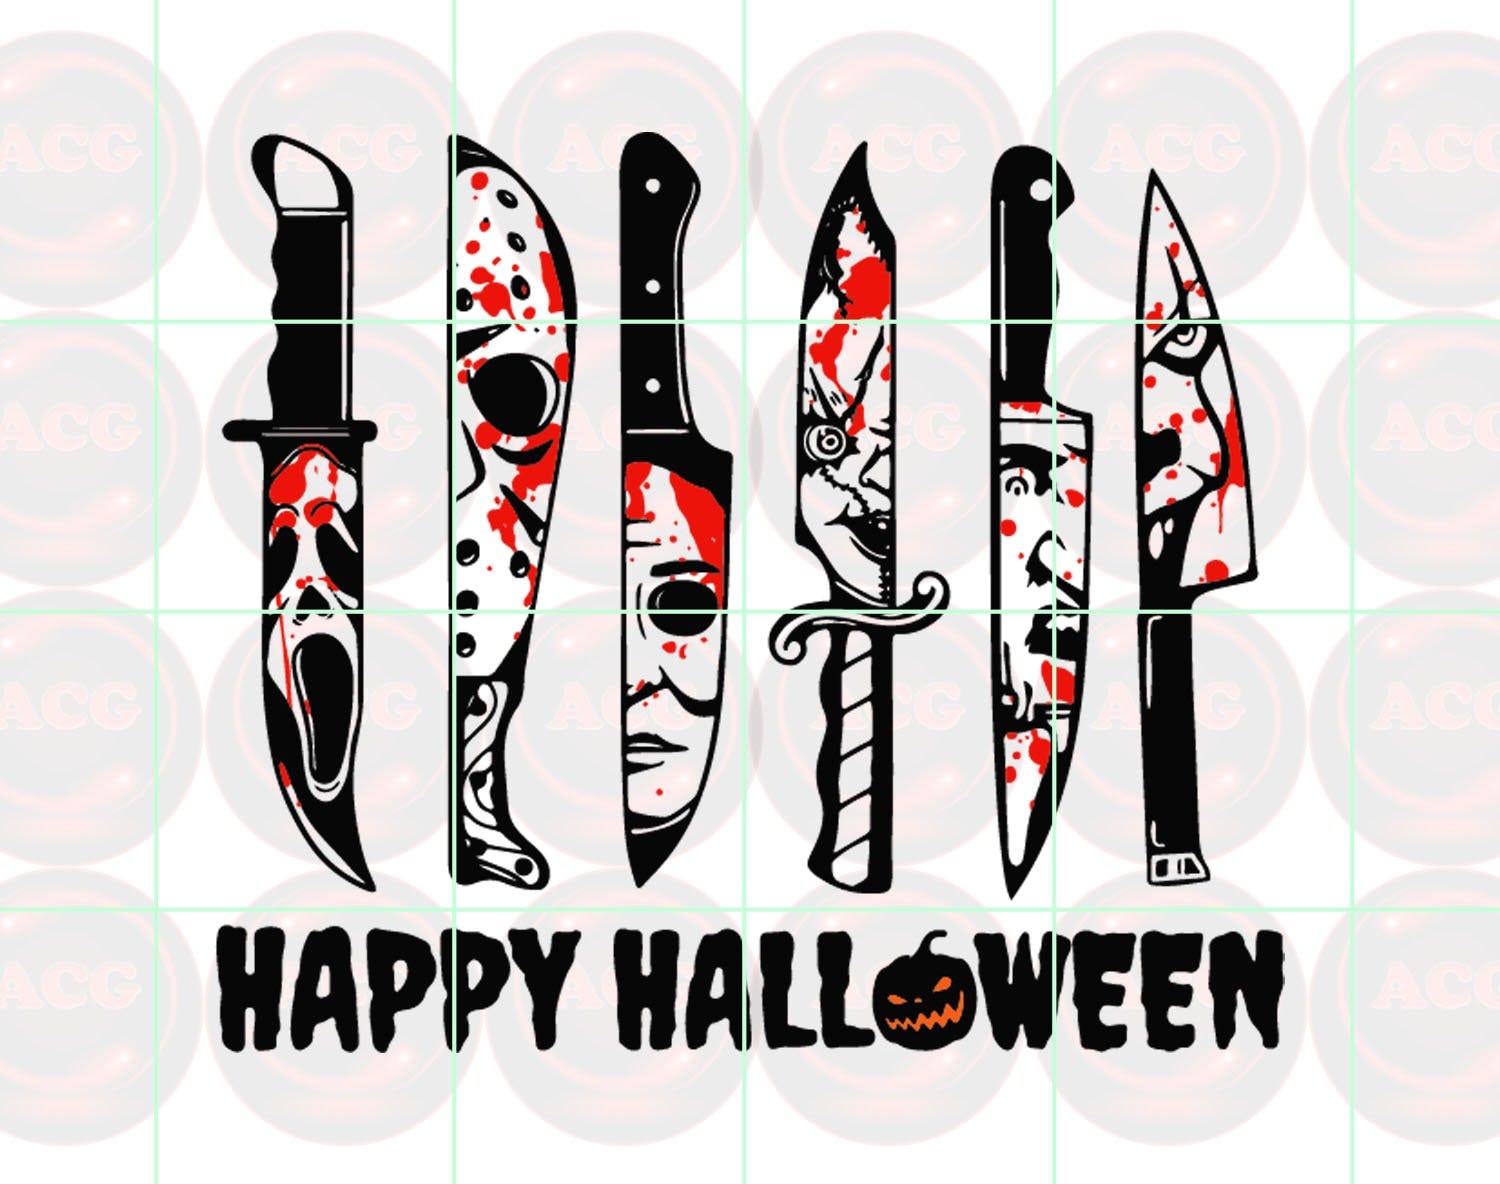 Happy Halloween Horror Movie Characters Svg, Png, Dxf, Pdf Instant Download Files